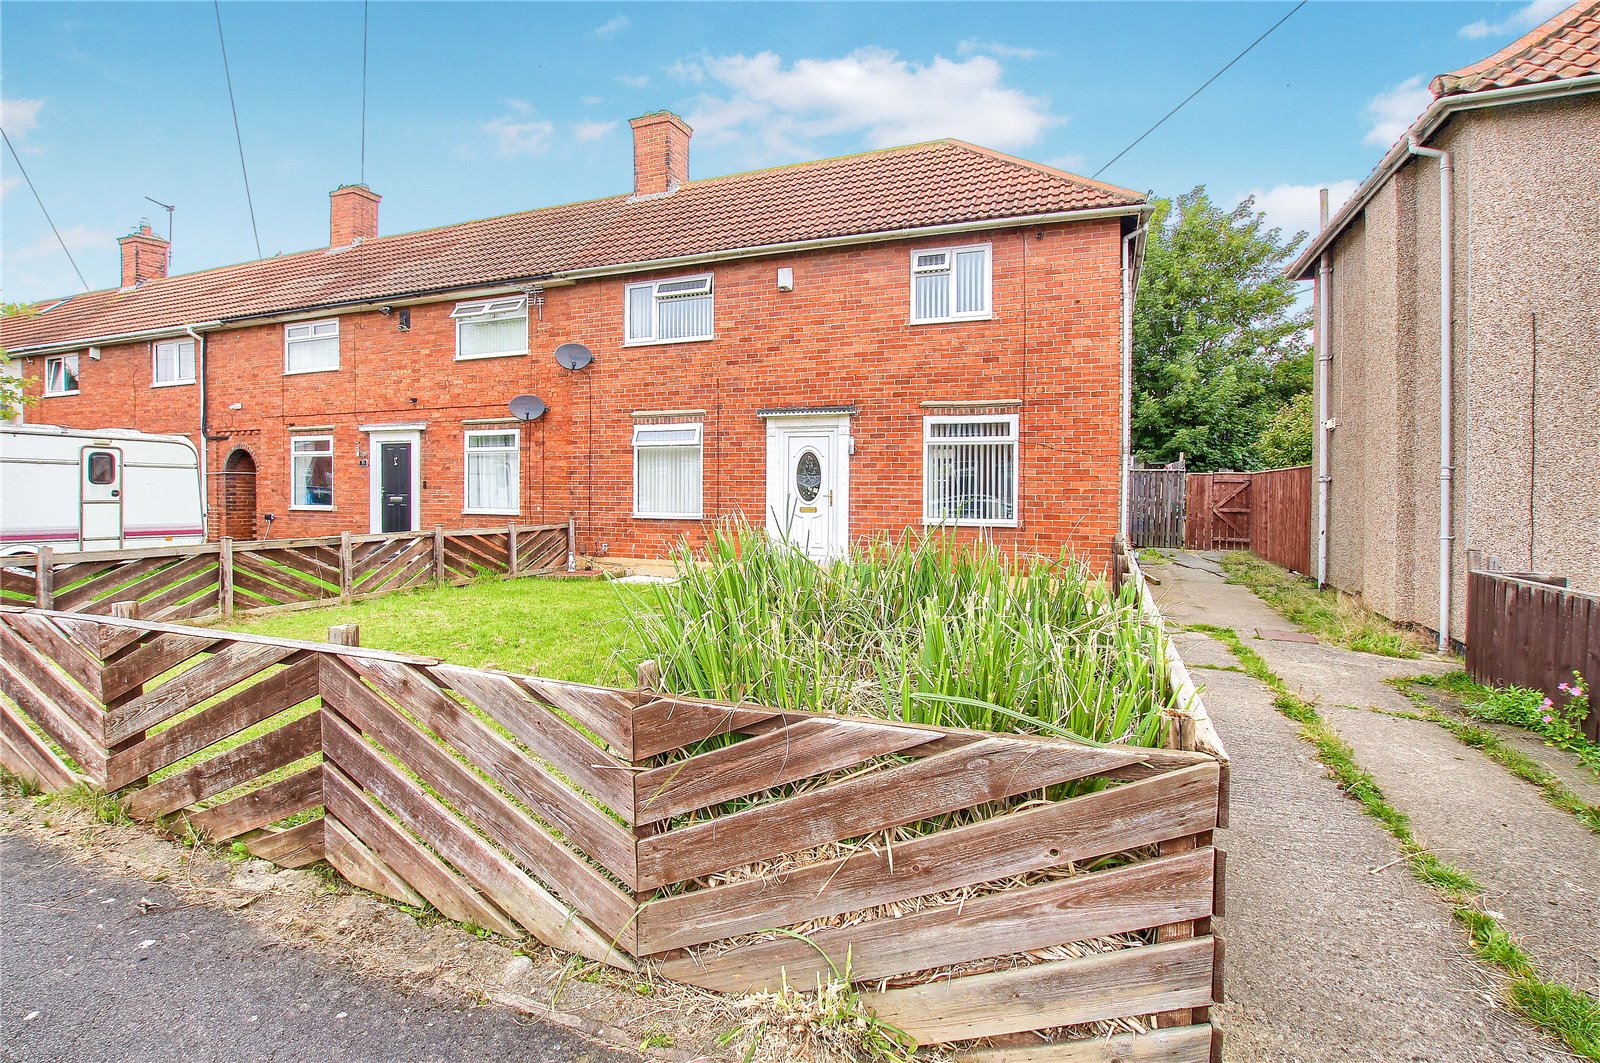 3 bed house for sale in Teesdale Avenue, Billingham - Property Image 1